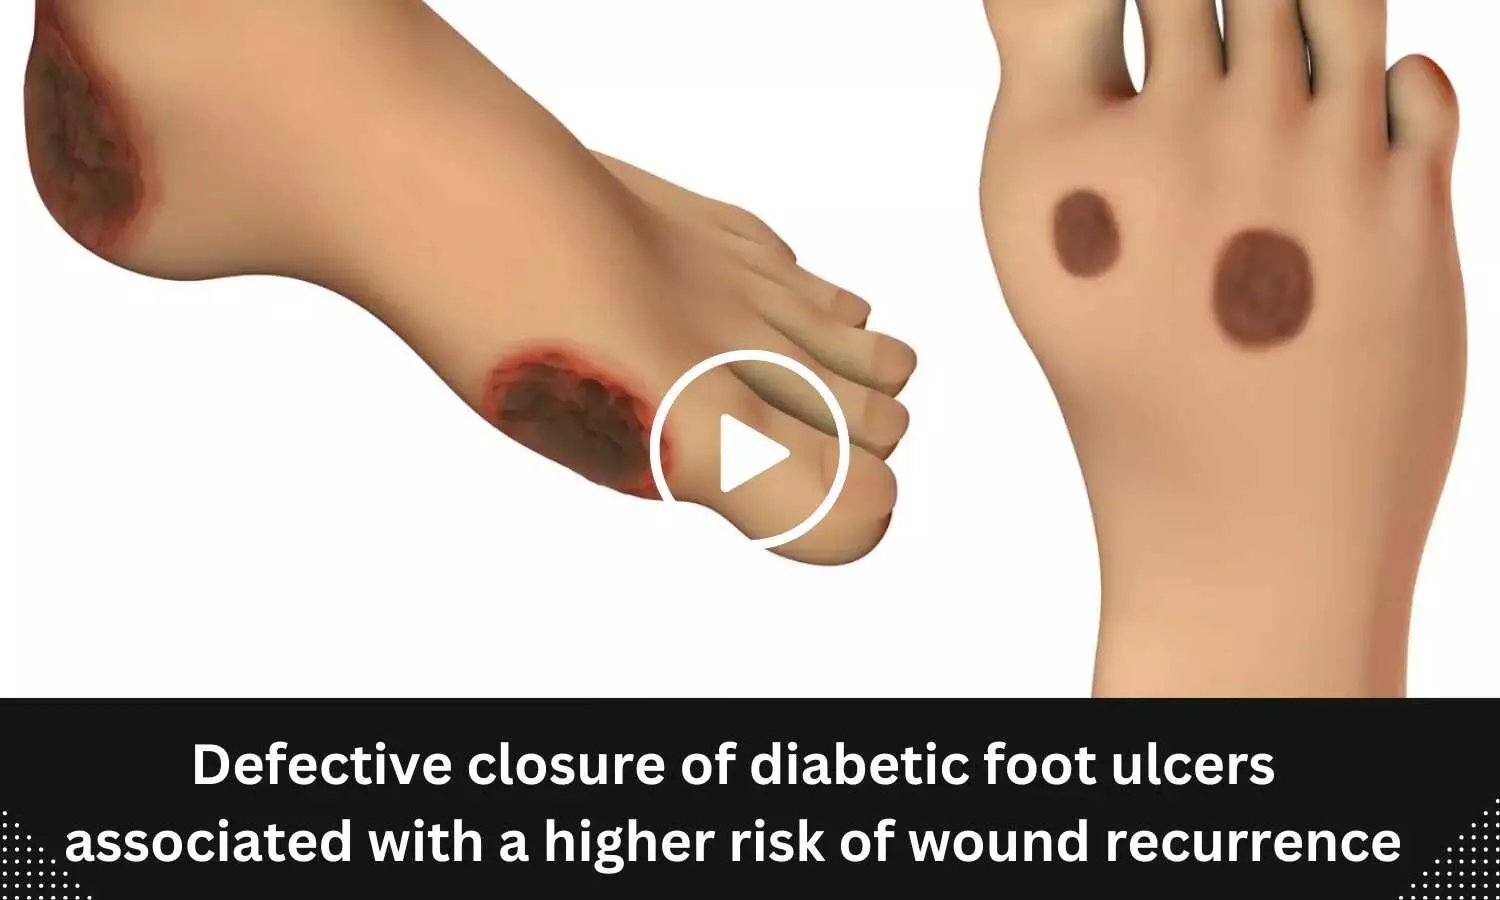 Defective closure of diabetic foot ulcers associated with a higher risk of wound recurrence